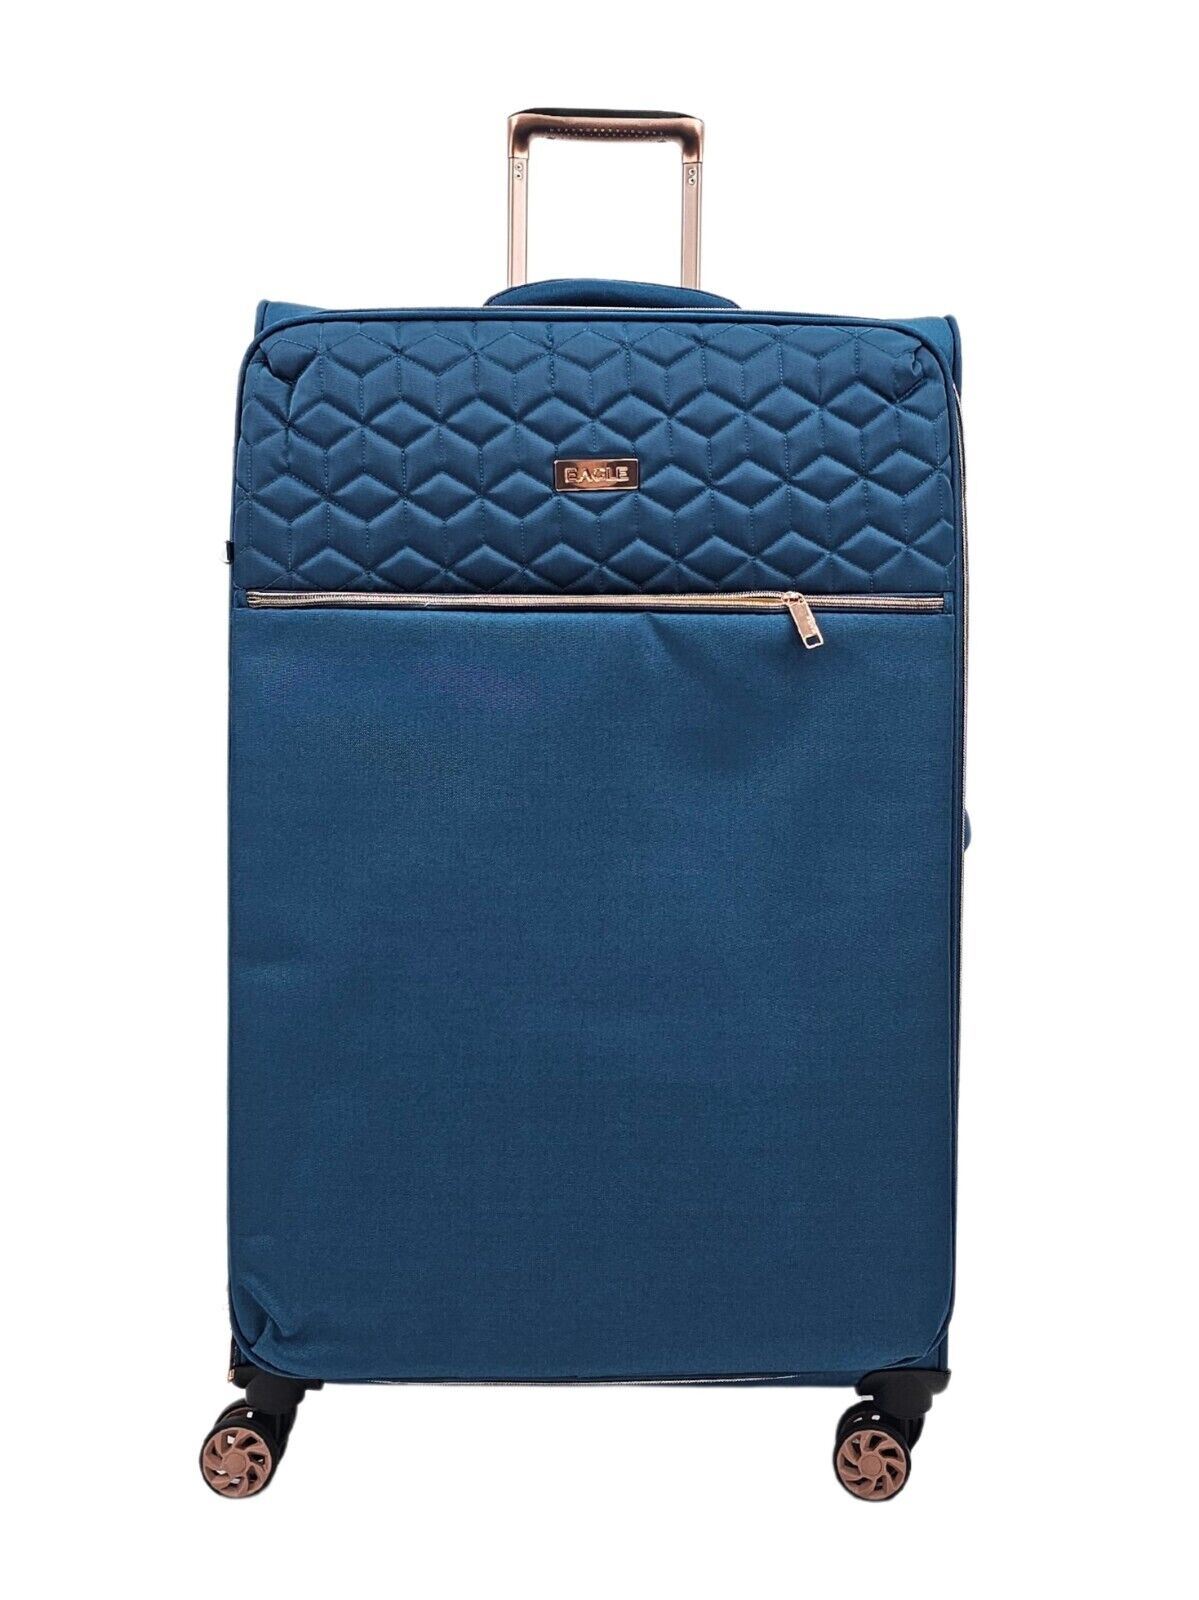 Cabin Teal blue Suitcases Set 4 Wheel Luggage Travel Lightweight Bags - Upperclass Fashions 